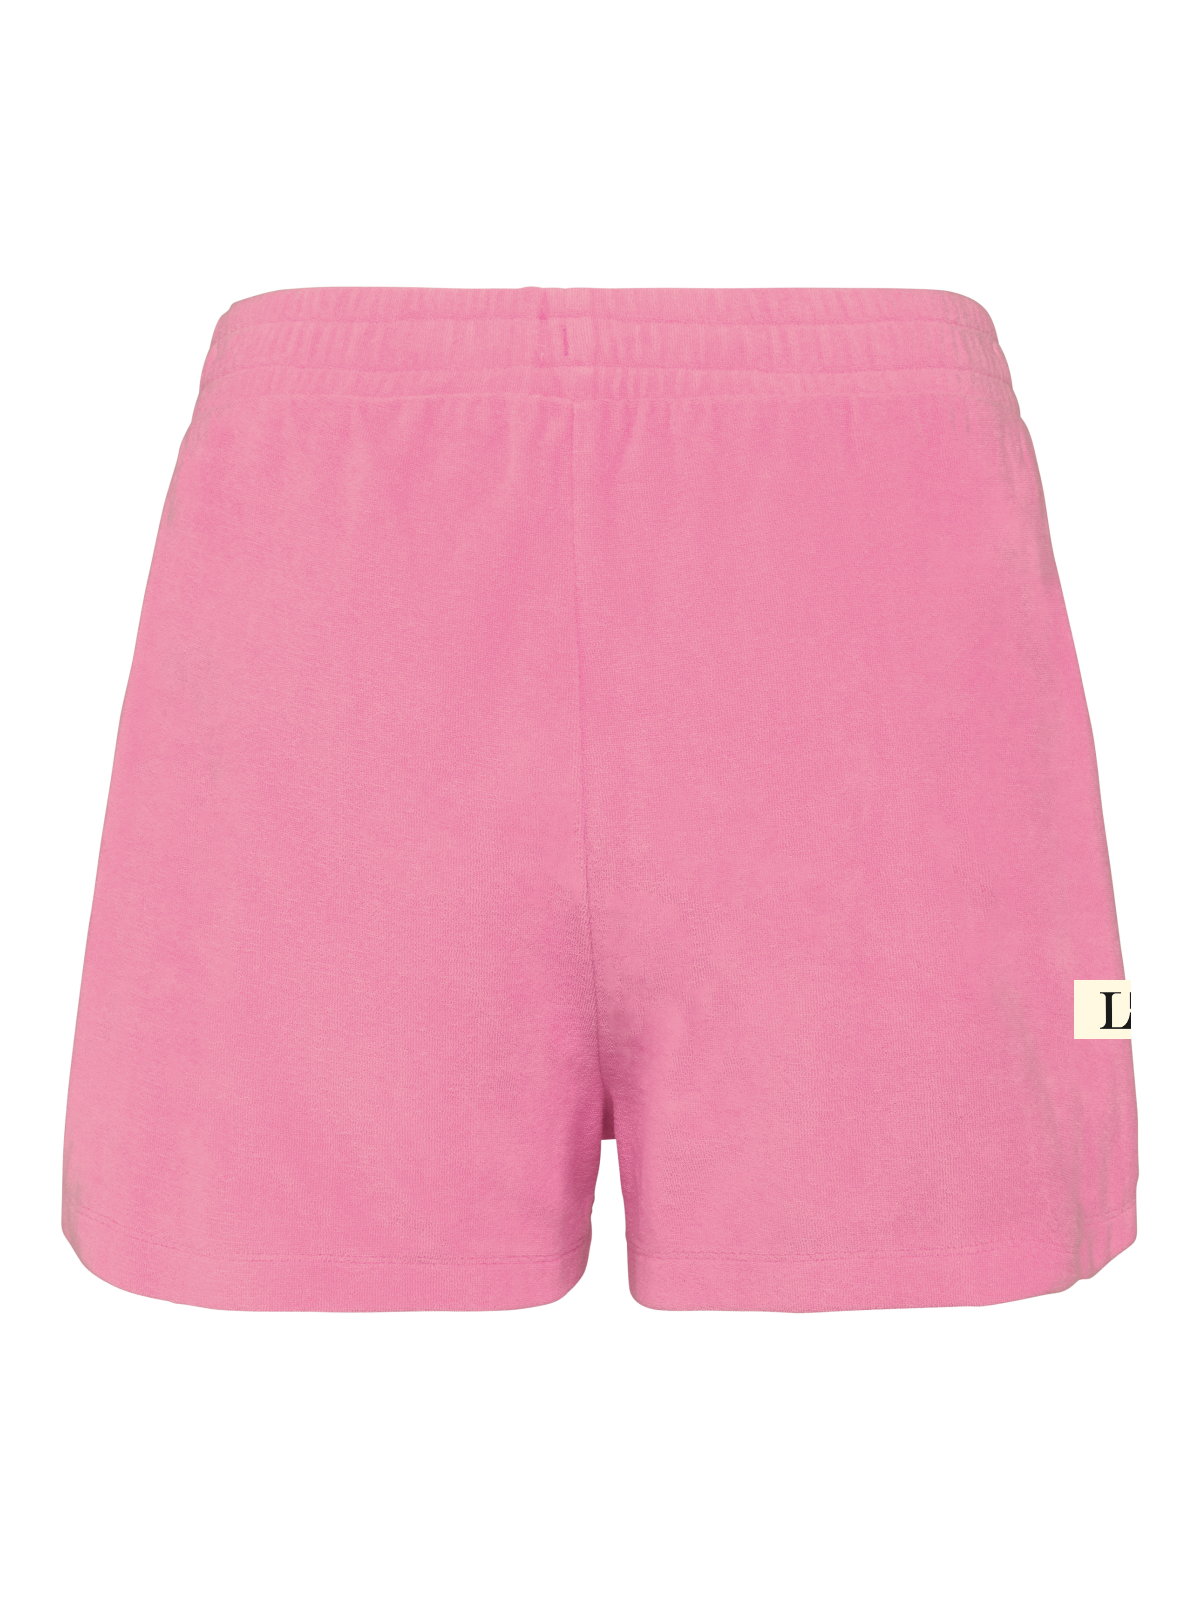 LL Terry Towel Shorts candy rose